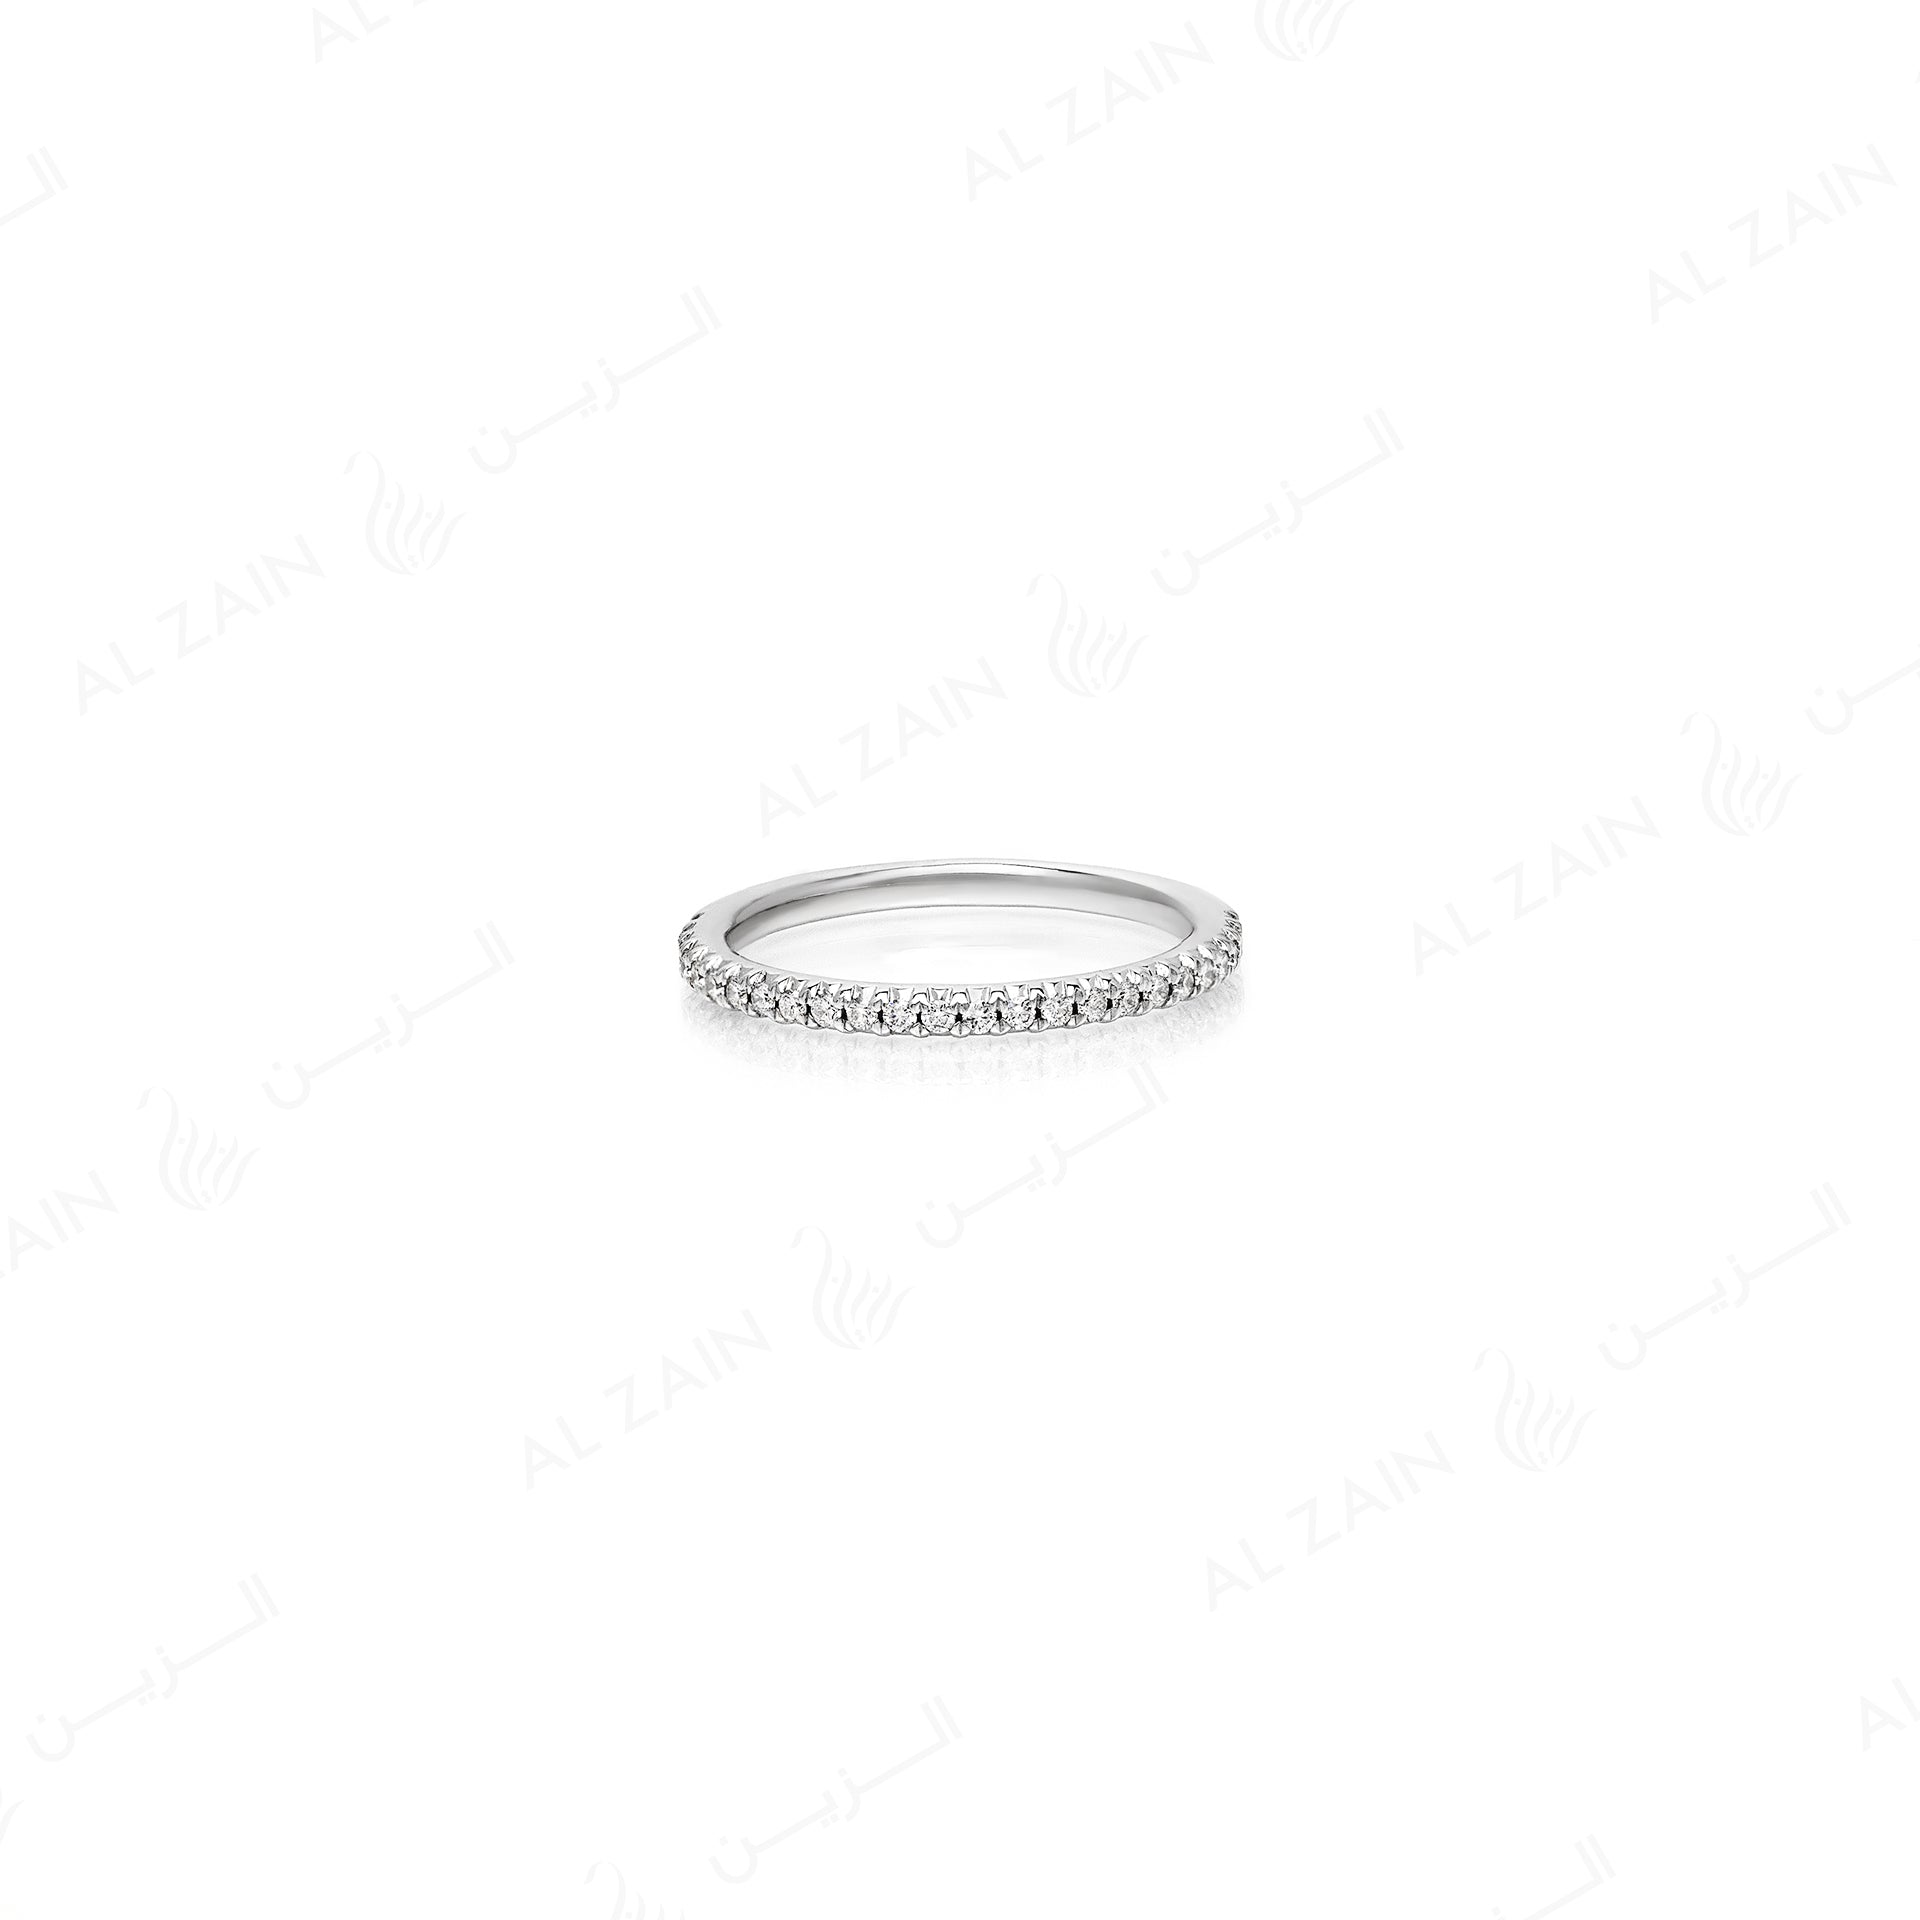 Wedding Band in White Gold